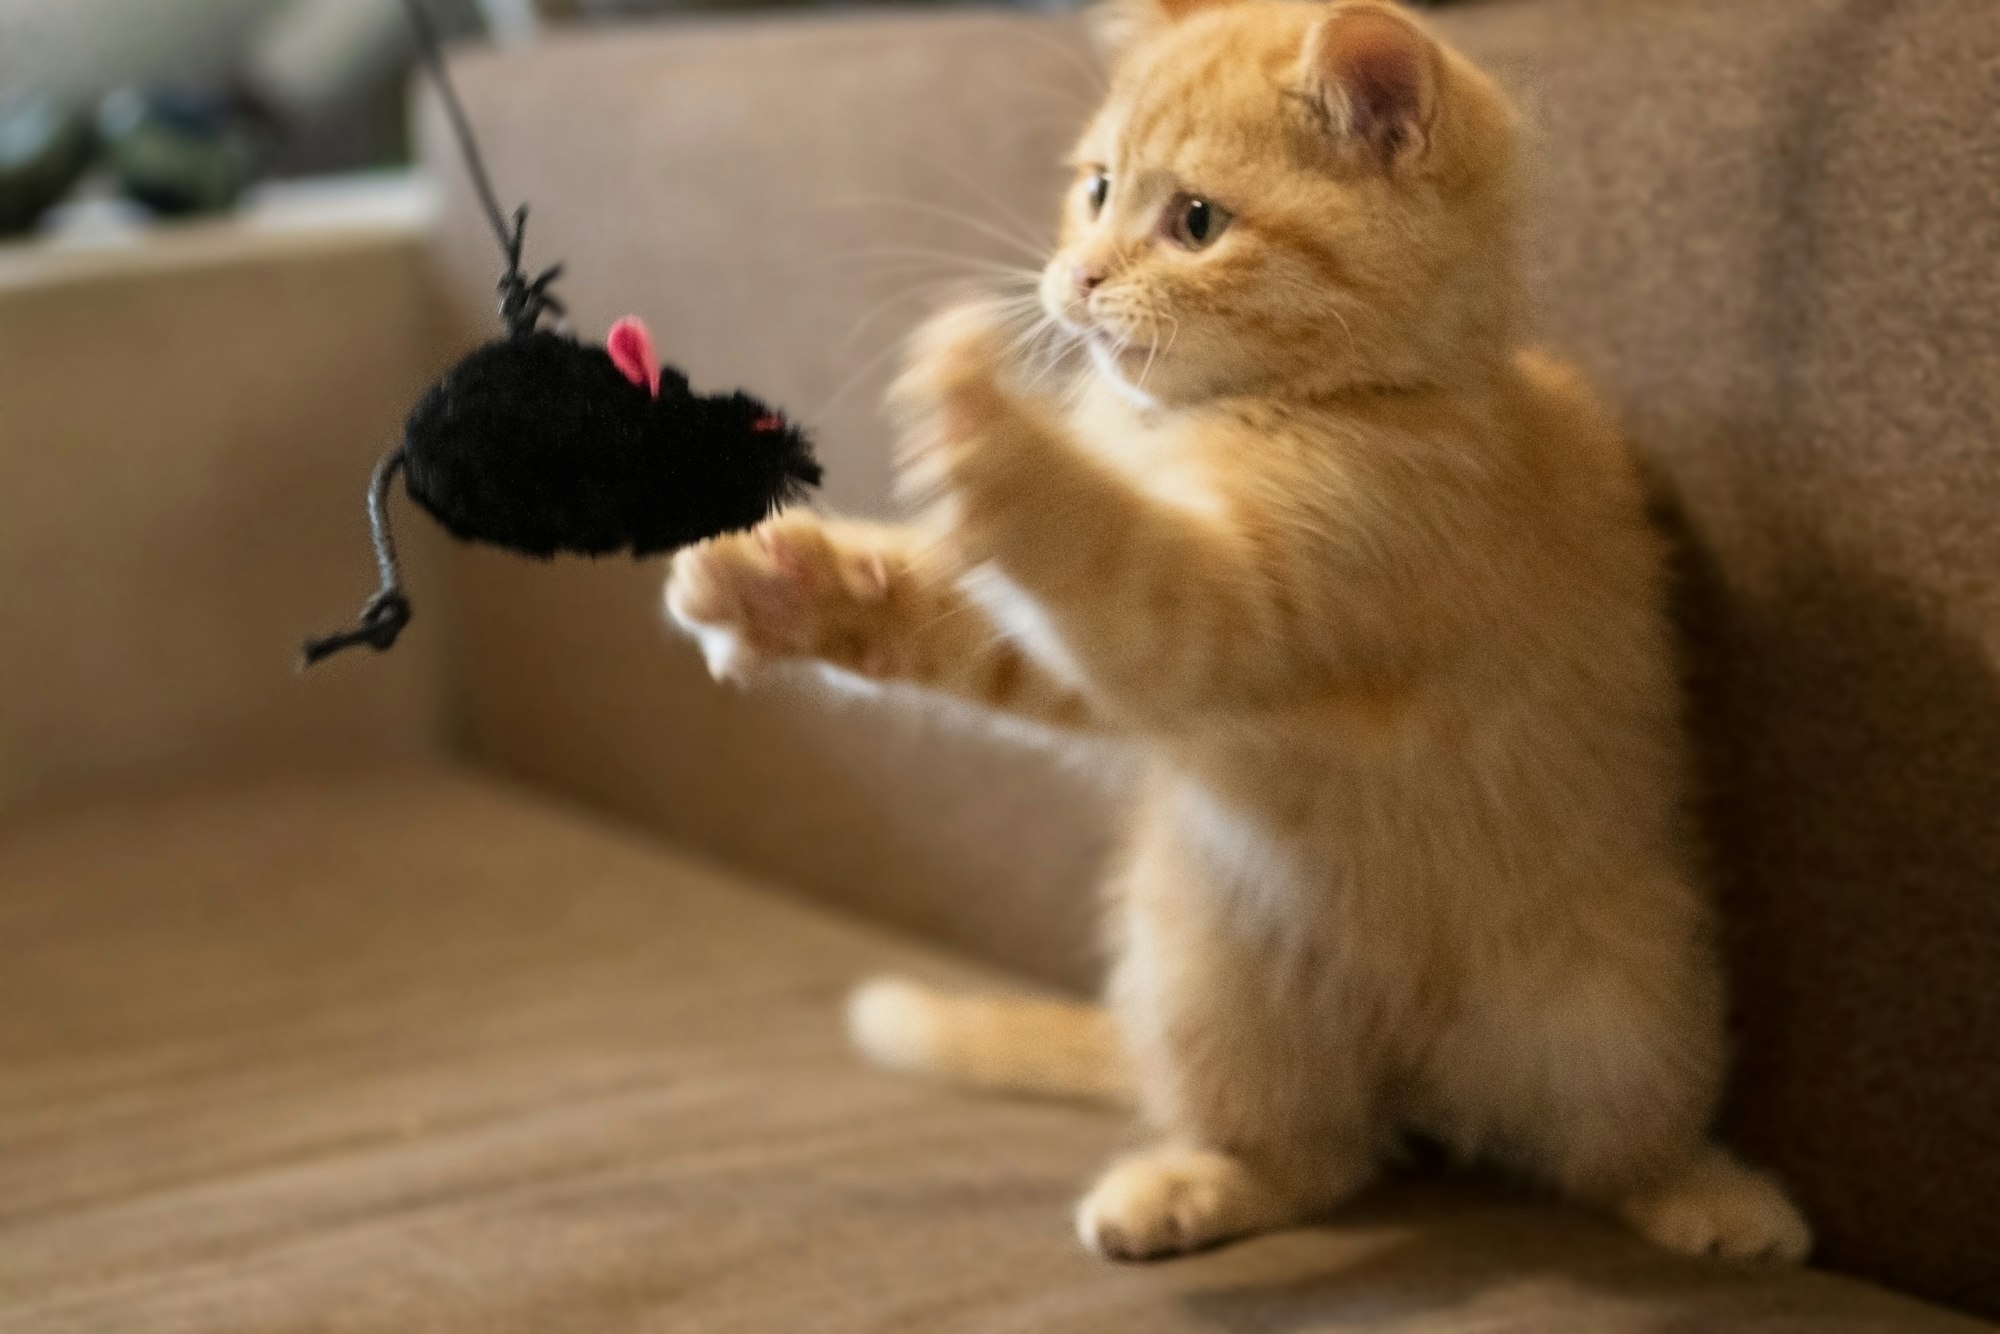 Cote domestic pet playing with toy mouse.